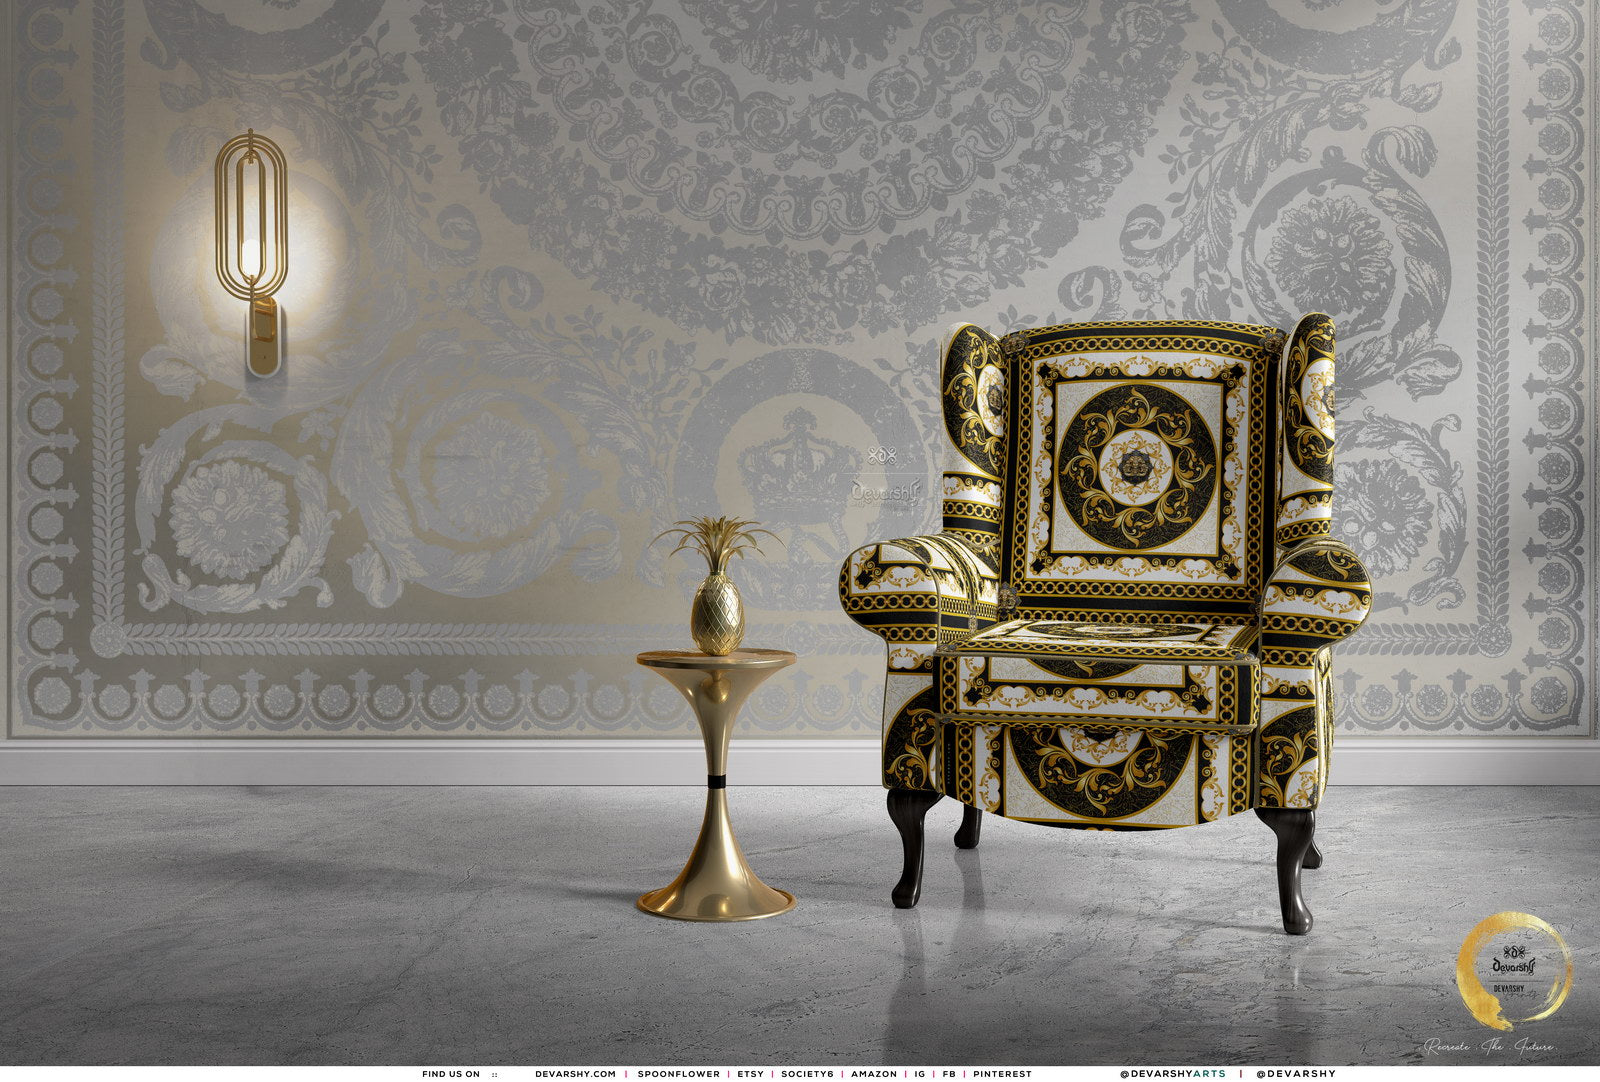 Golden Squares Upholstery Fabric 3meters, 6 Designs, 13 Fabric Options.  Baroque Fabric By the Yard, 039